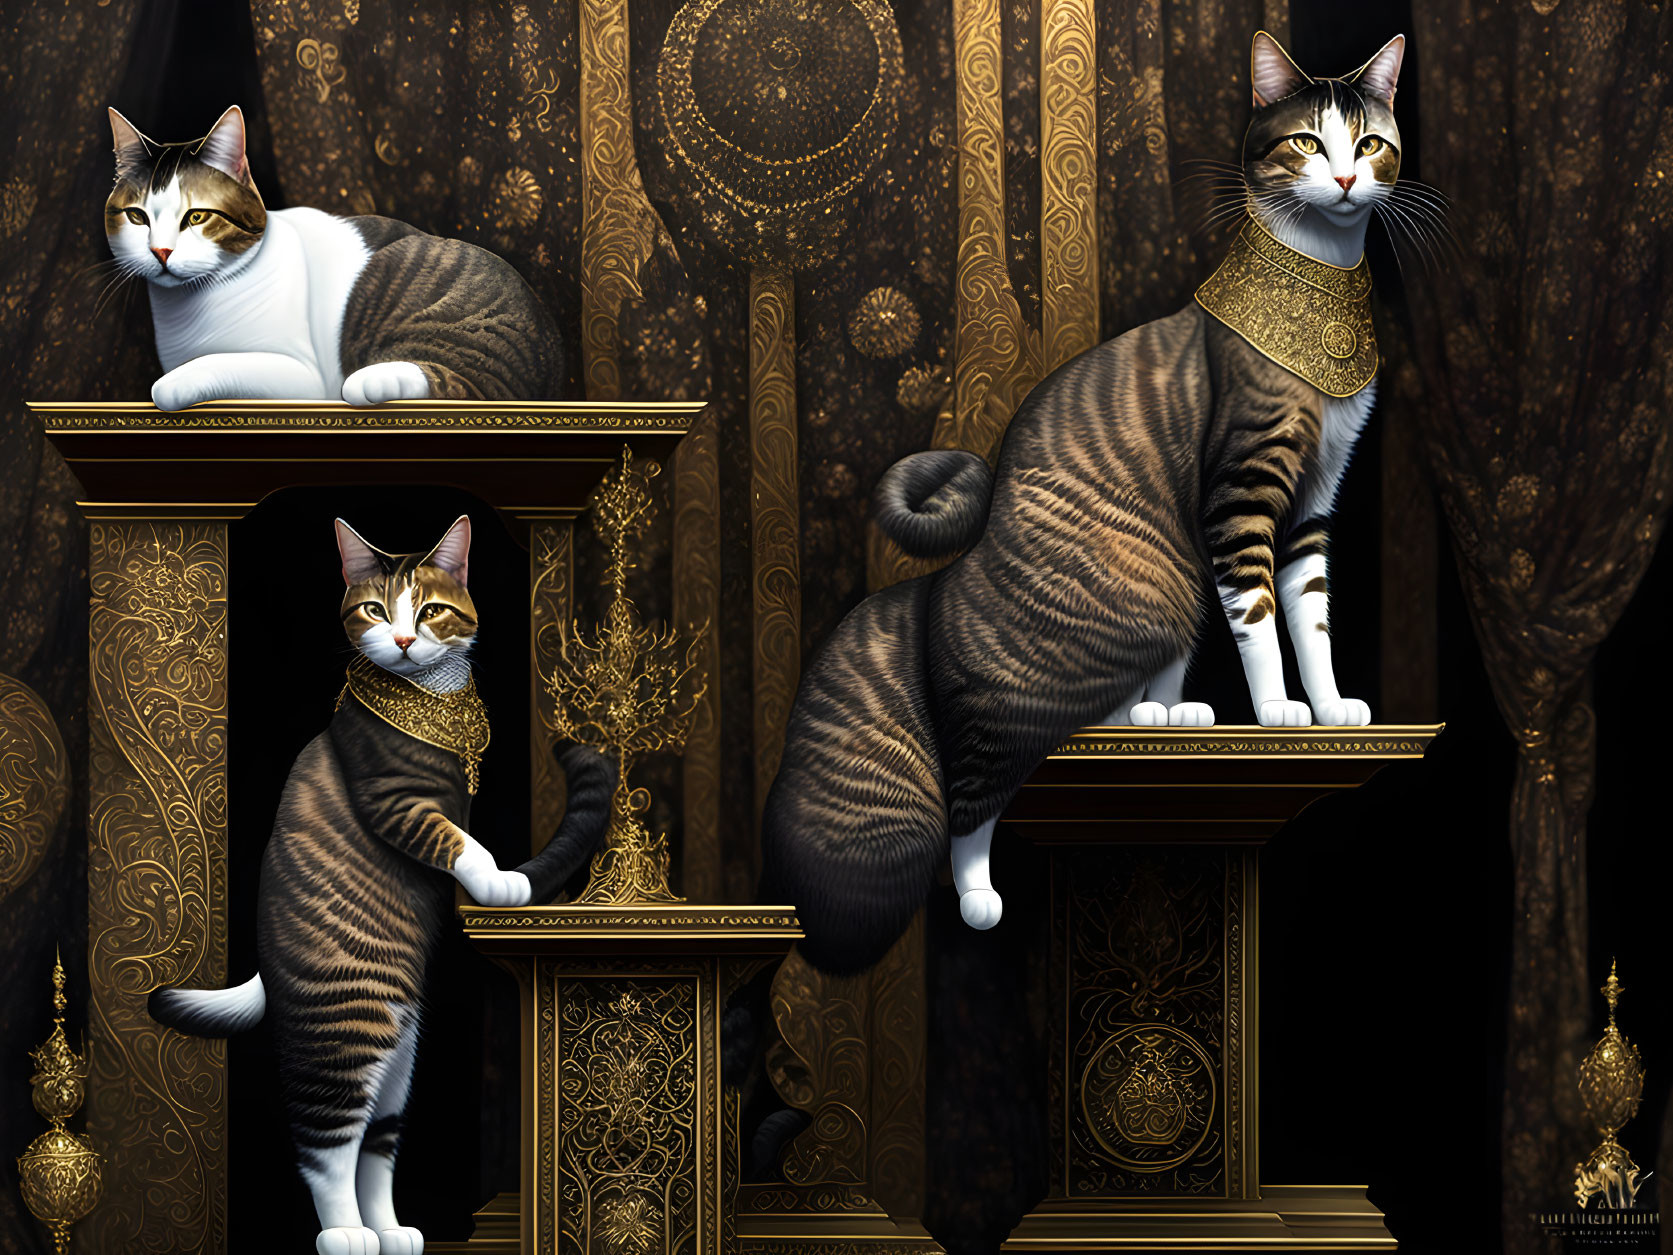 Three cats on gold collars on elegant pedestals against a patterned dark backdrop